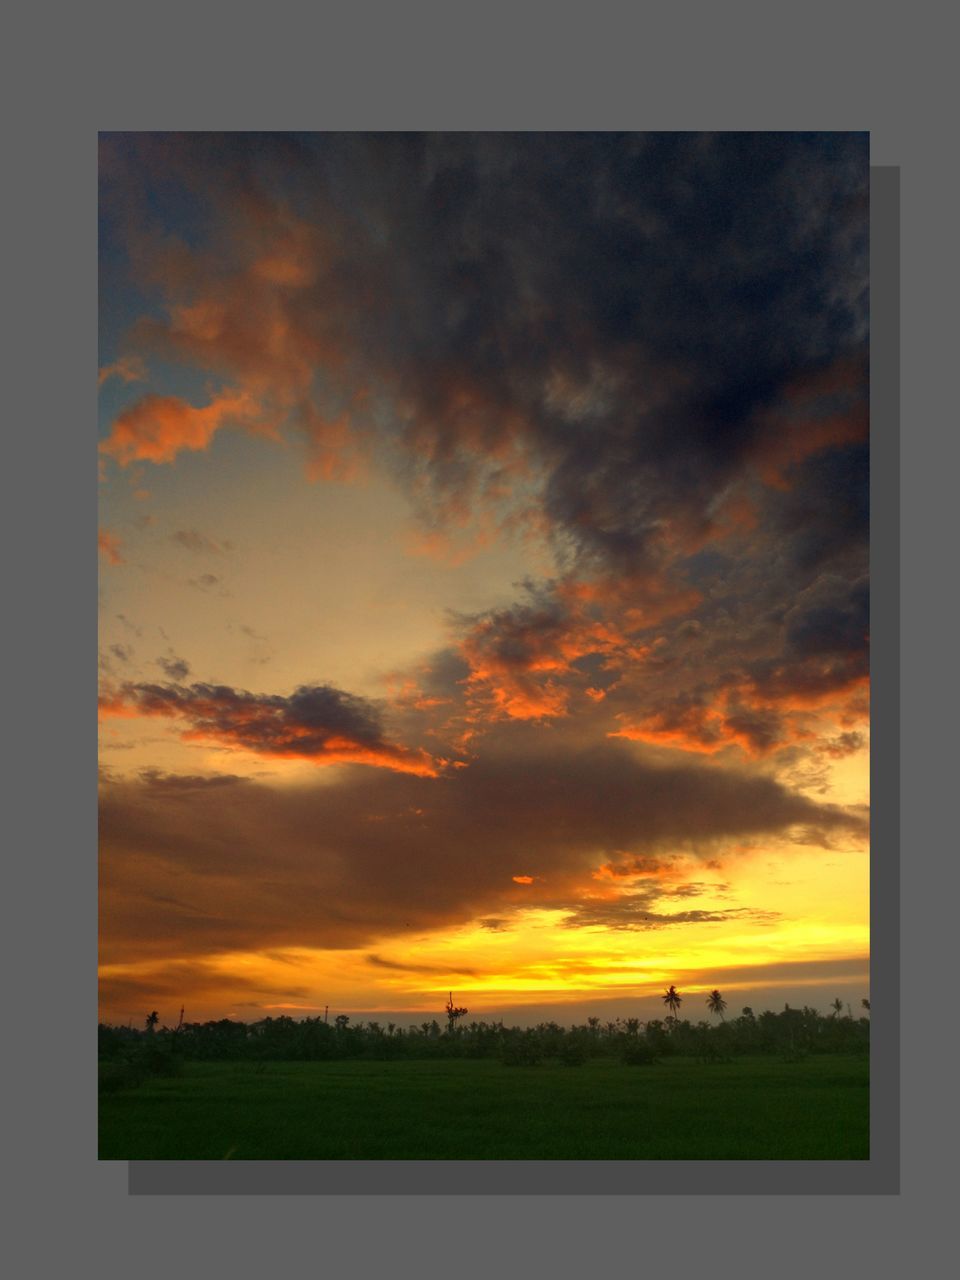 sunset, orange color, nature, scenics, dramatic sky, beauty in nature, tranquil scene, cloud - sky, tranquility, no people, sky, landscape, idyllic, field, outdoors, growth, grass, day